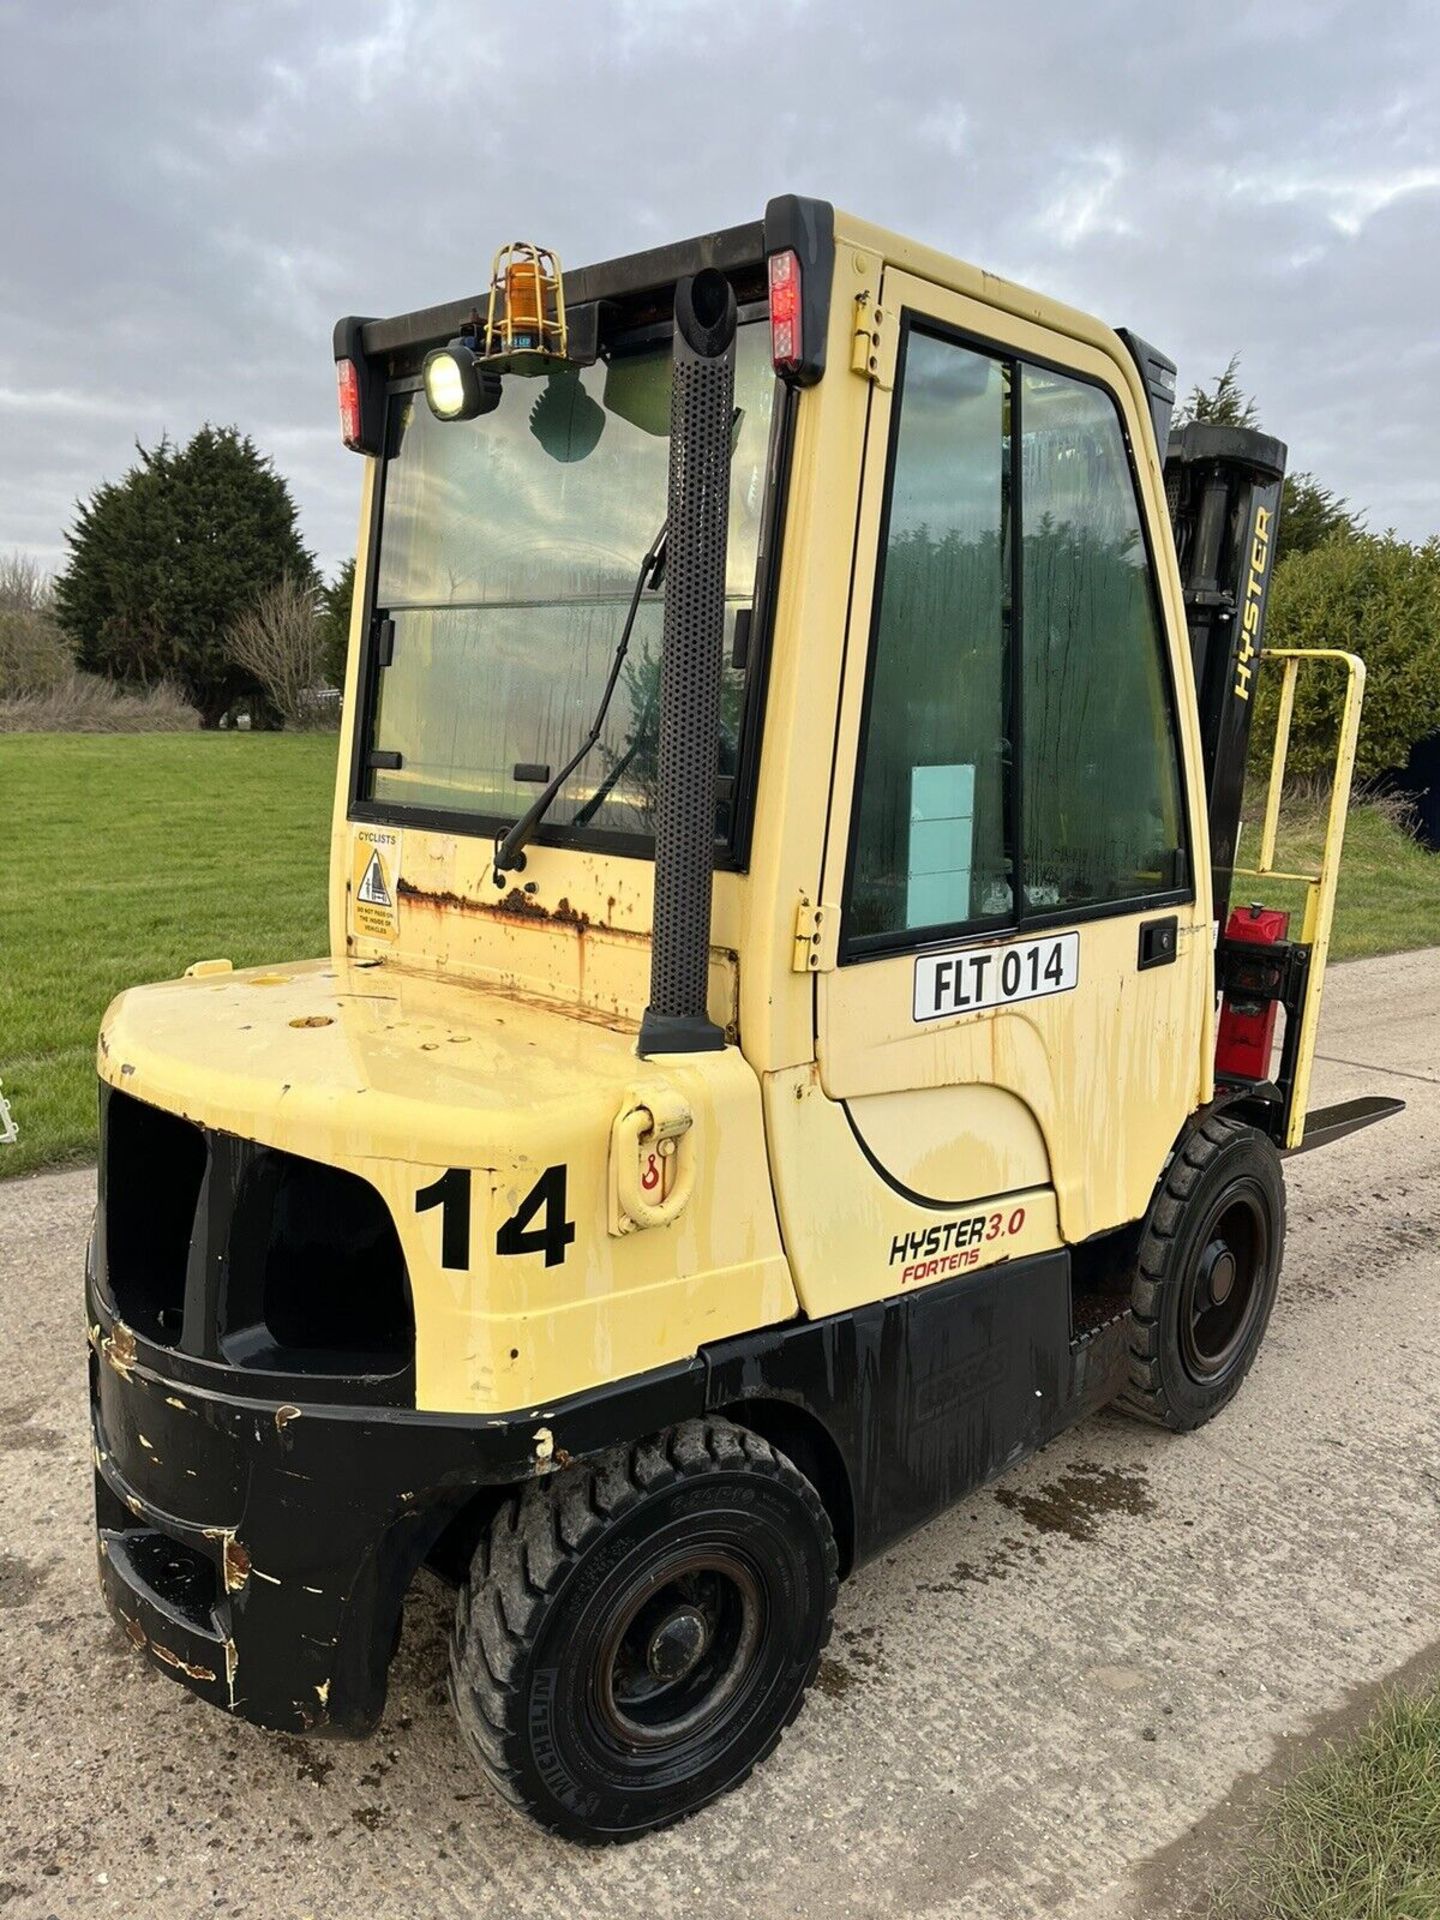 Hyster forklift truck full heated cab - Image 4 of 7